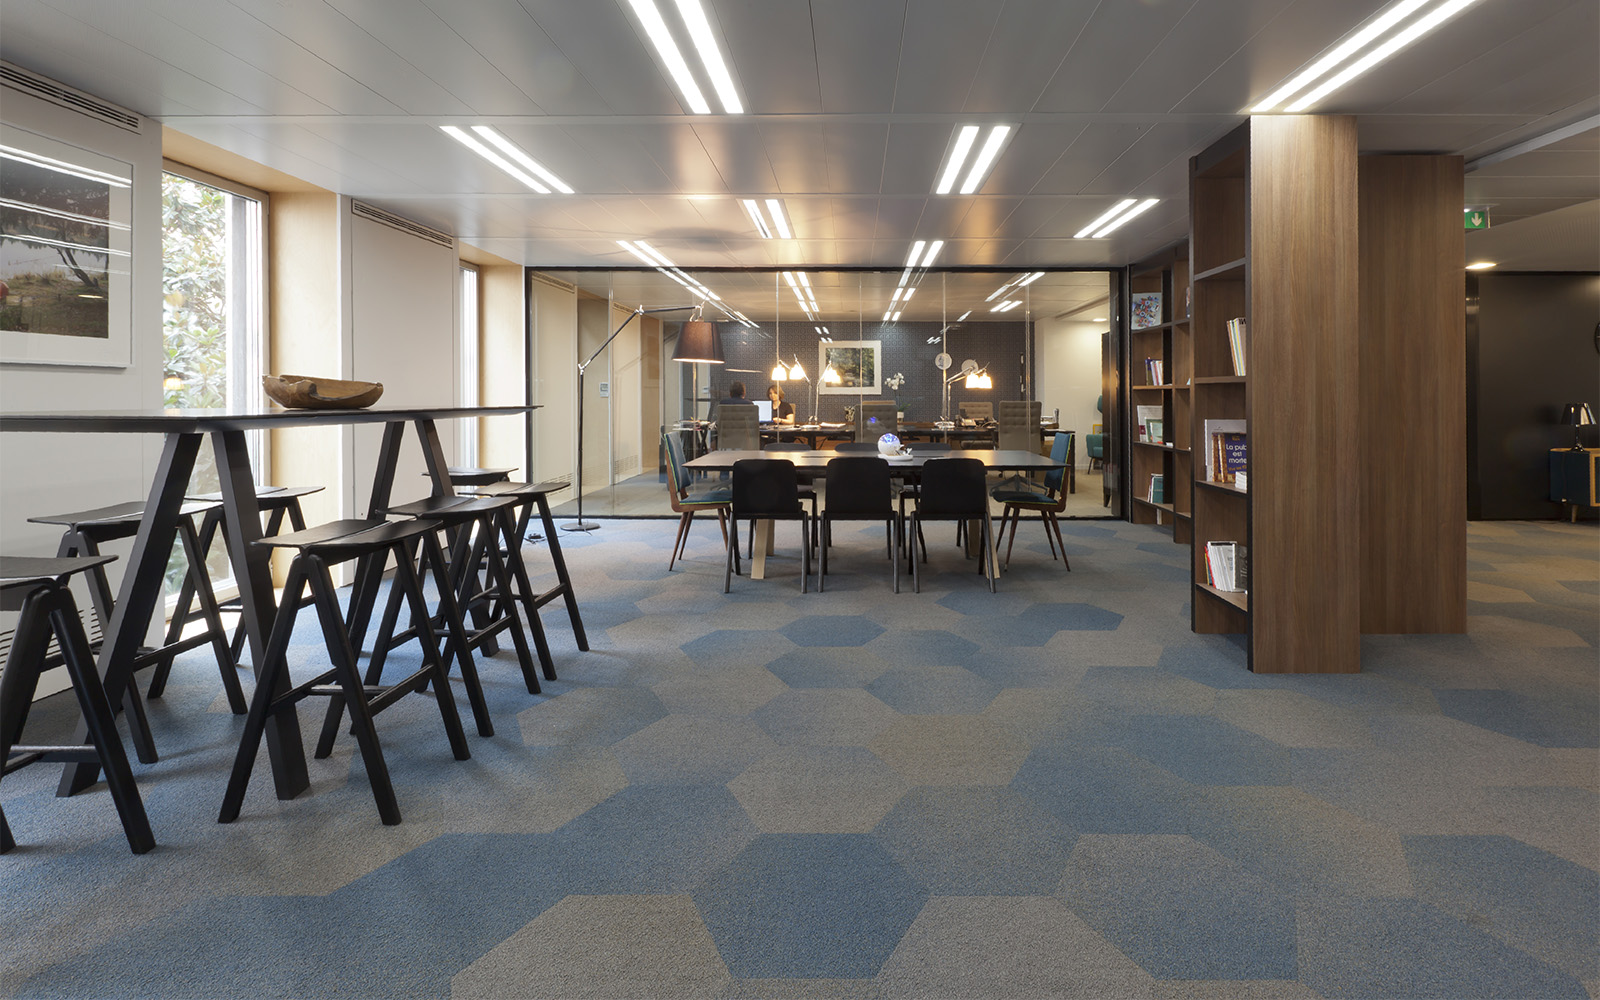 hexagon-shaped blue and beige carpet tiles by ege